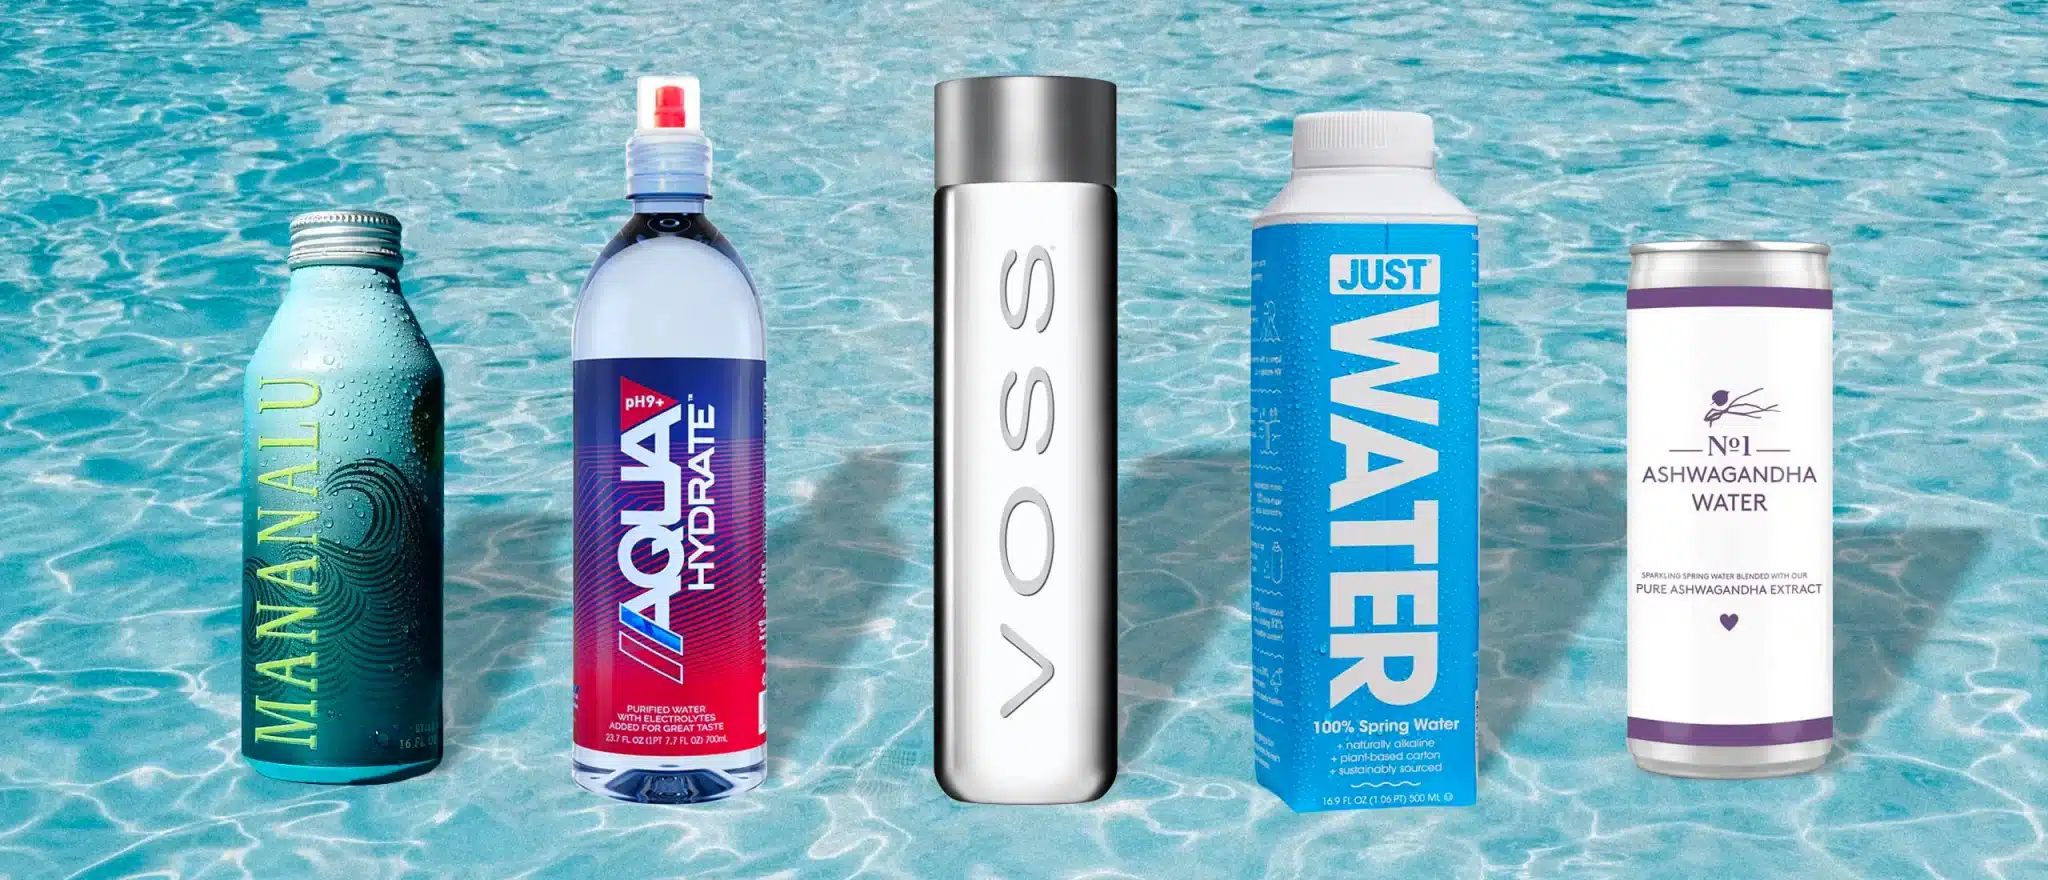 These Celebrity Backed Waters May be the Key to Living Longer